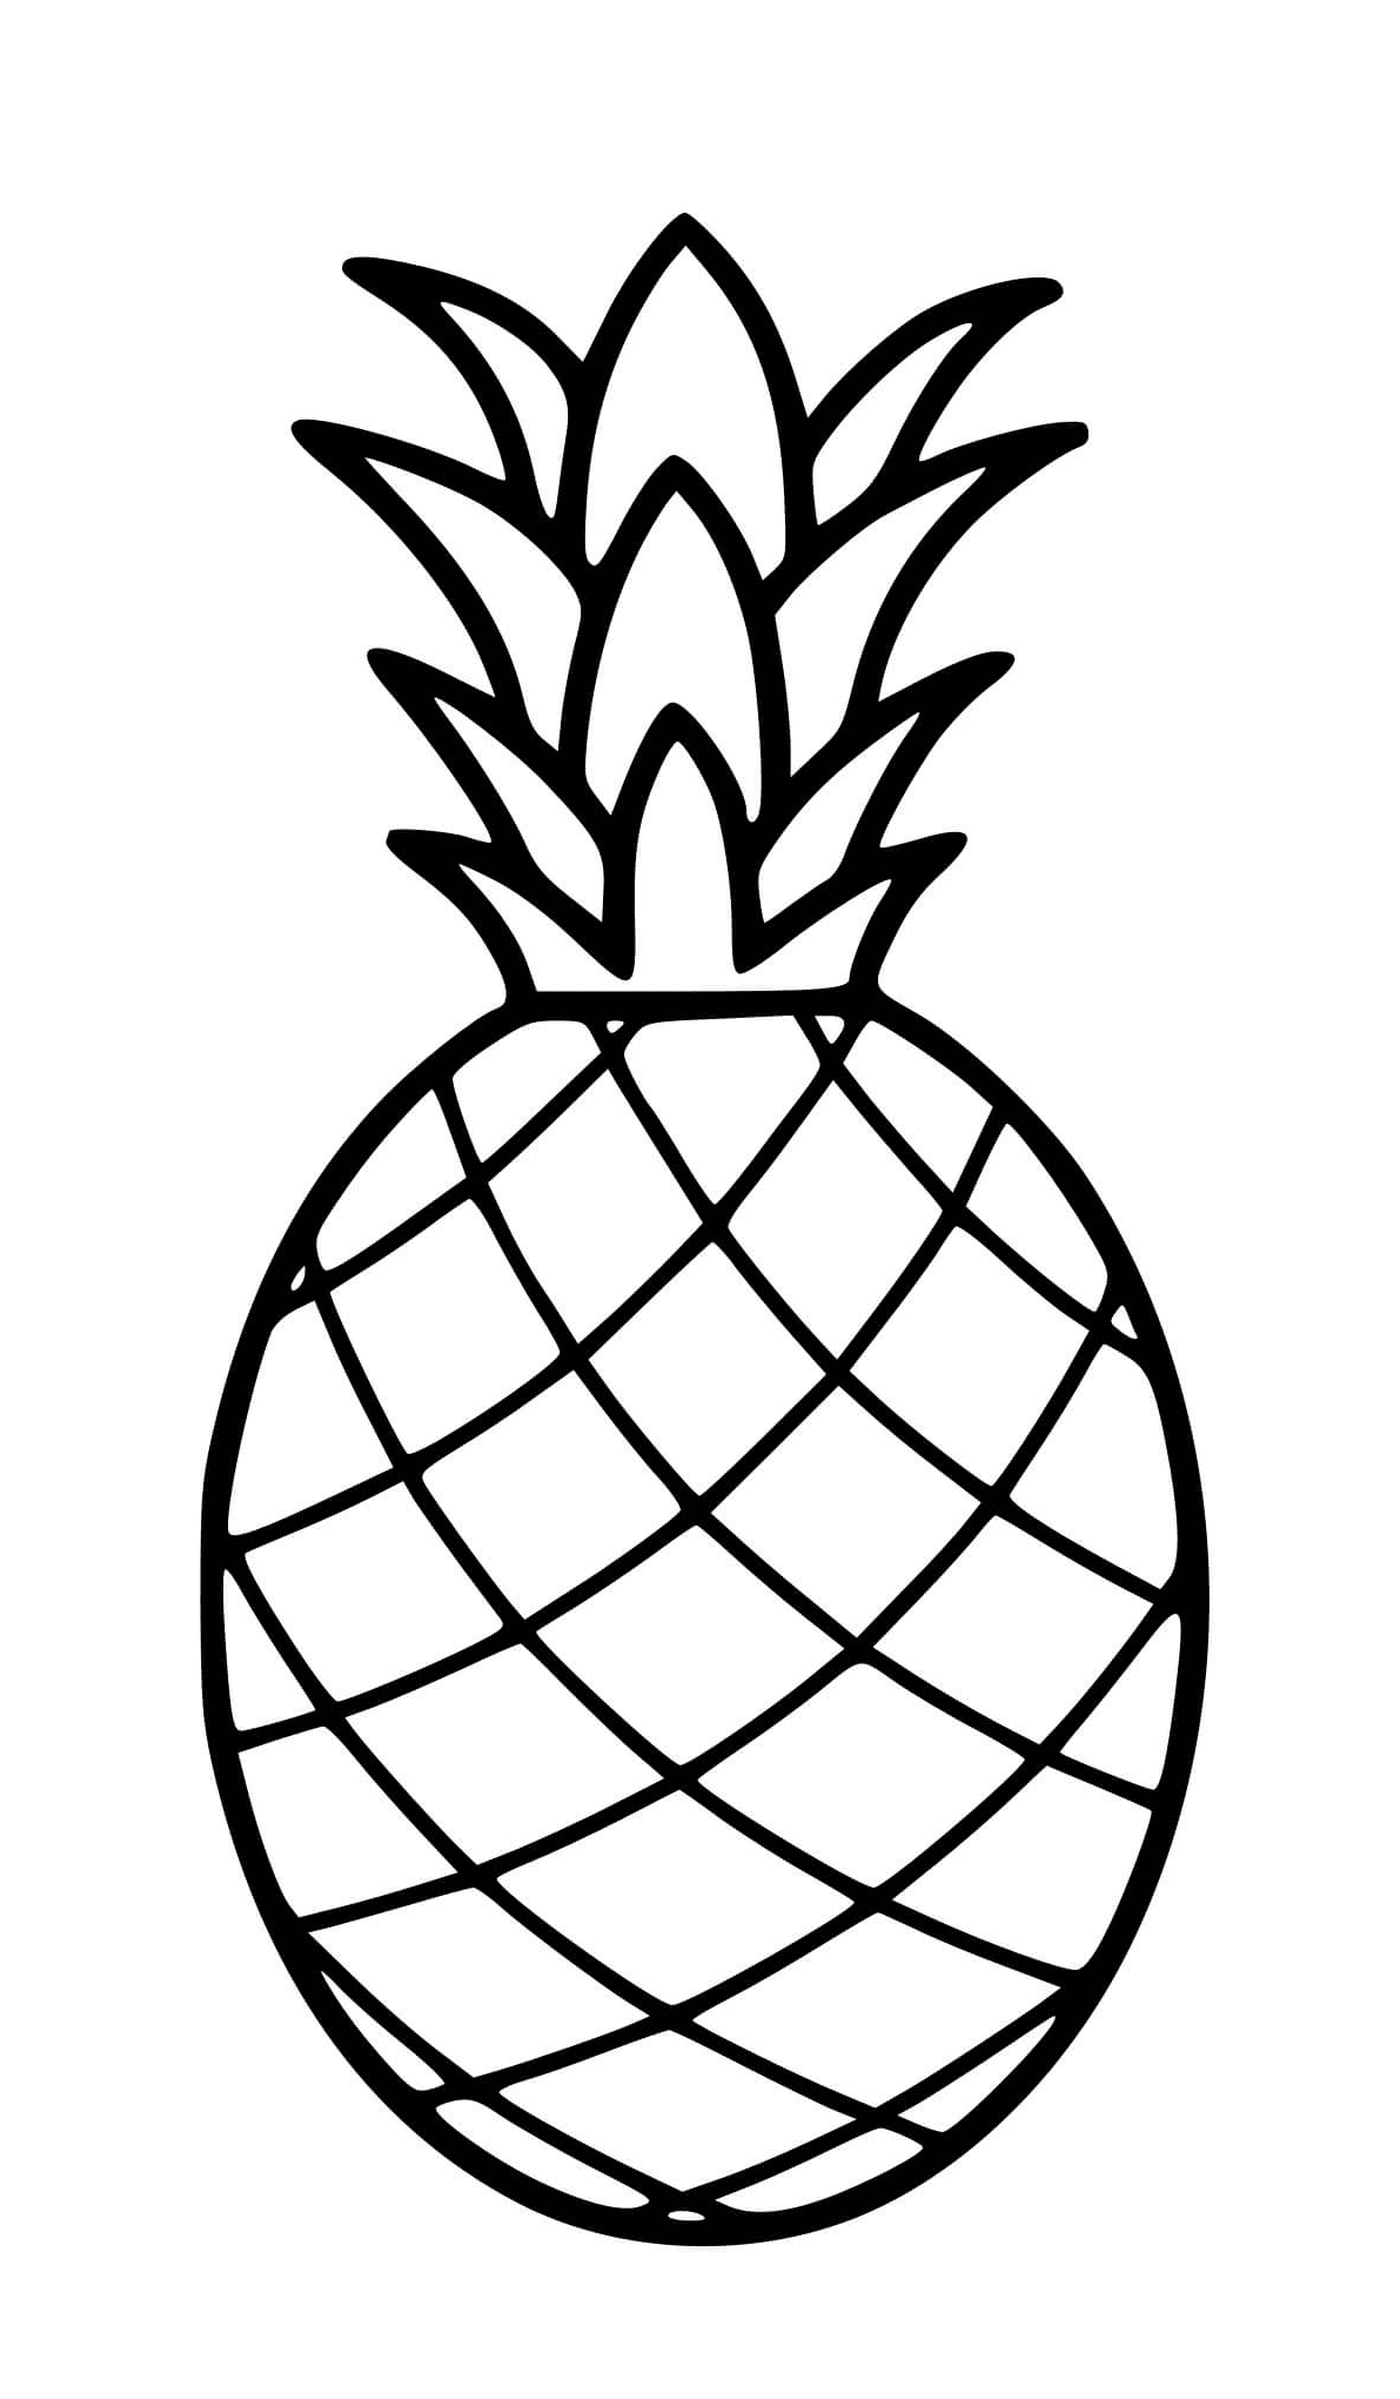  A pineapple drawn realistically 